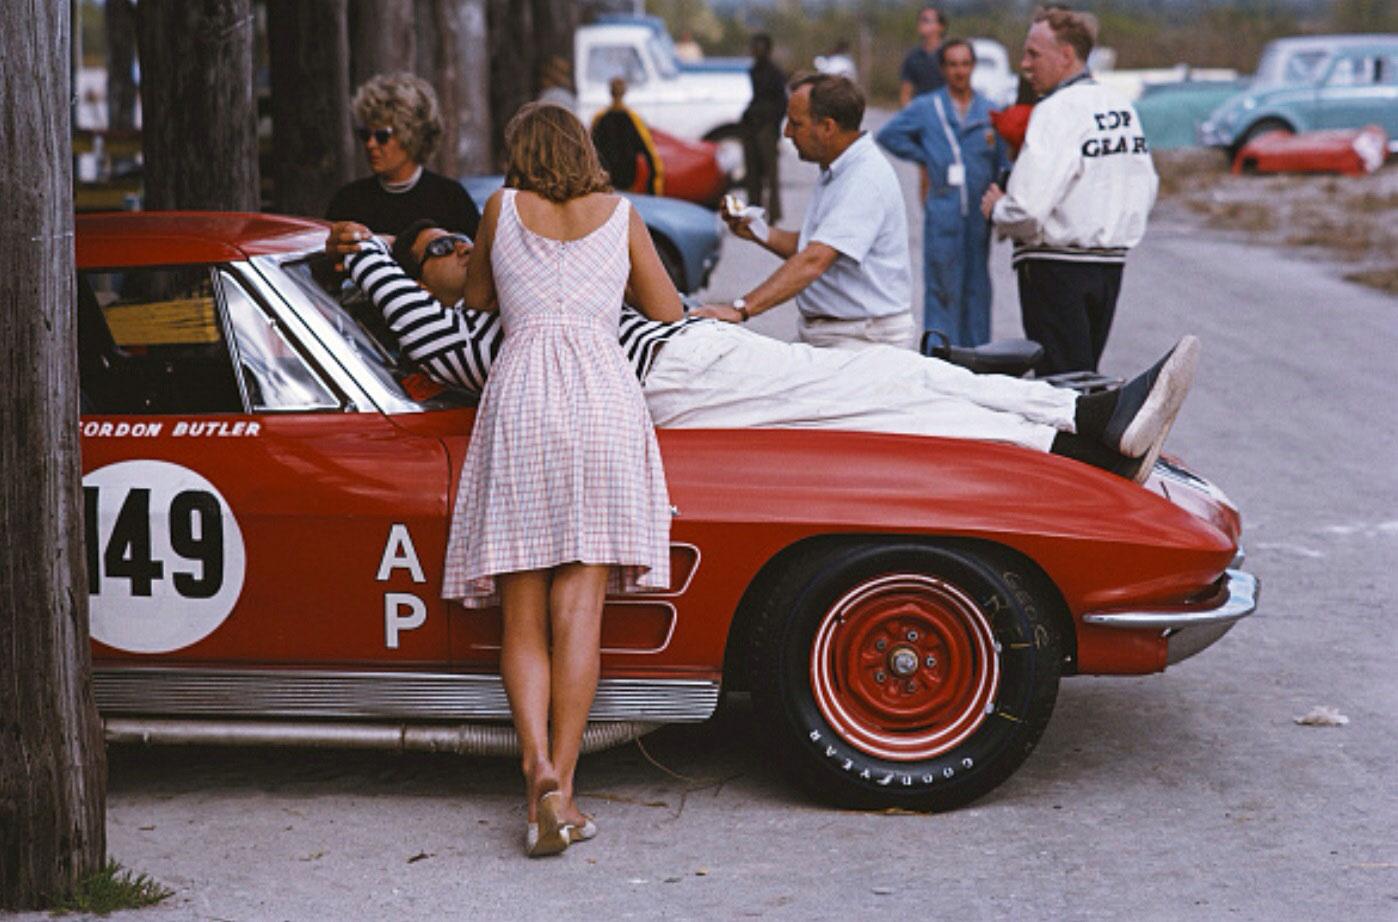 Bahamas Speed Week, 1963
C Print
24 x 20 inches
Estate edition of 150

Gordon Butler's Chevrolet Corvette Sting Ray at the Bahamas Speed Week at the Oakes Course, Nassau, December 1963.

The entire Slim Aarons Collection is available at IFAC Arts in